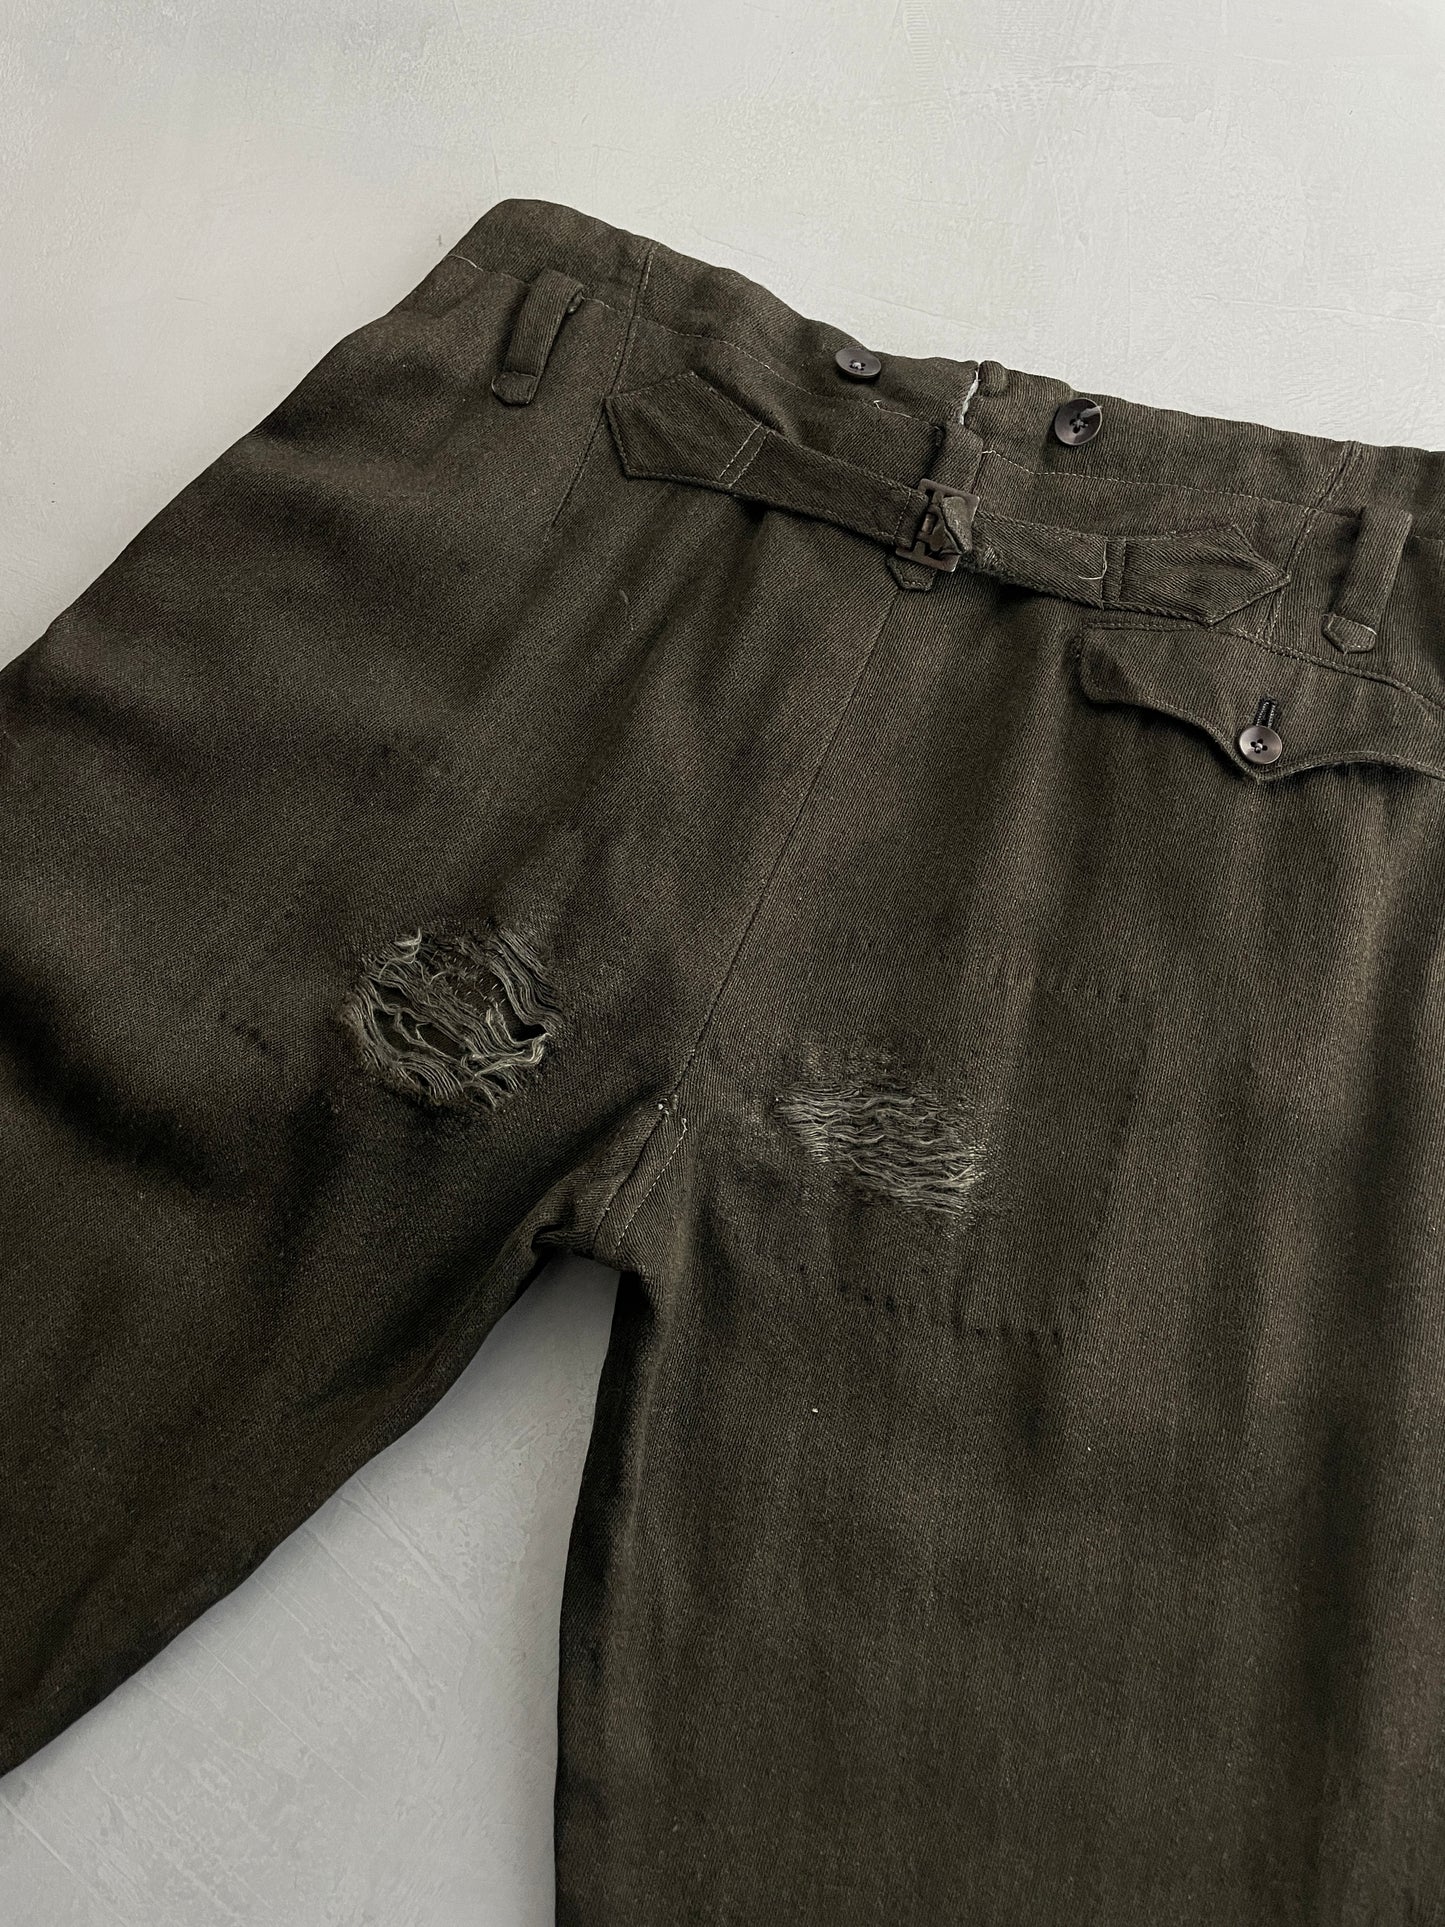 1940's Overdyed Japanese Buckle Back Pants [32"]